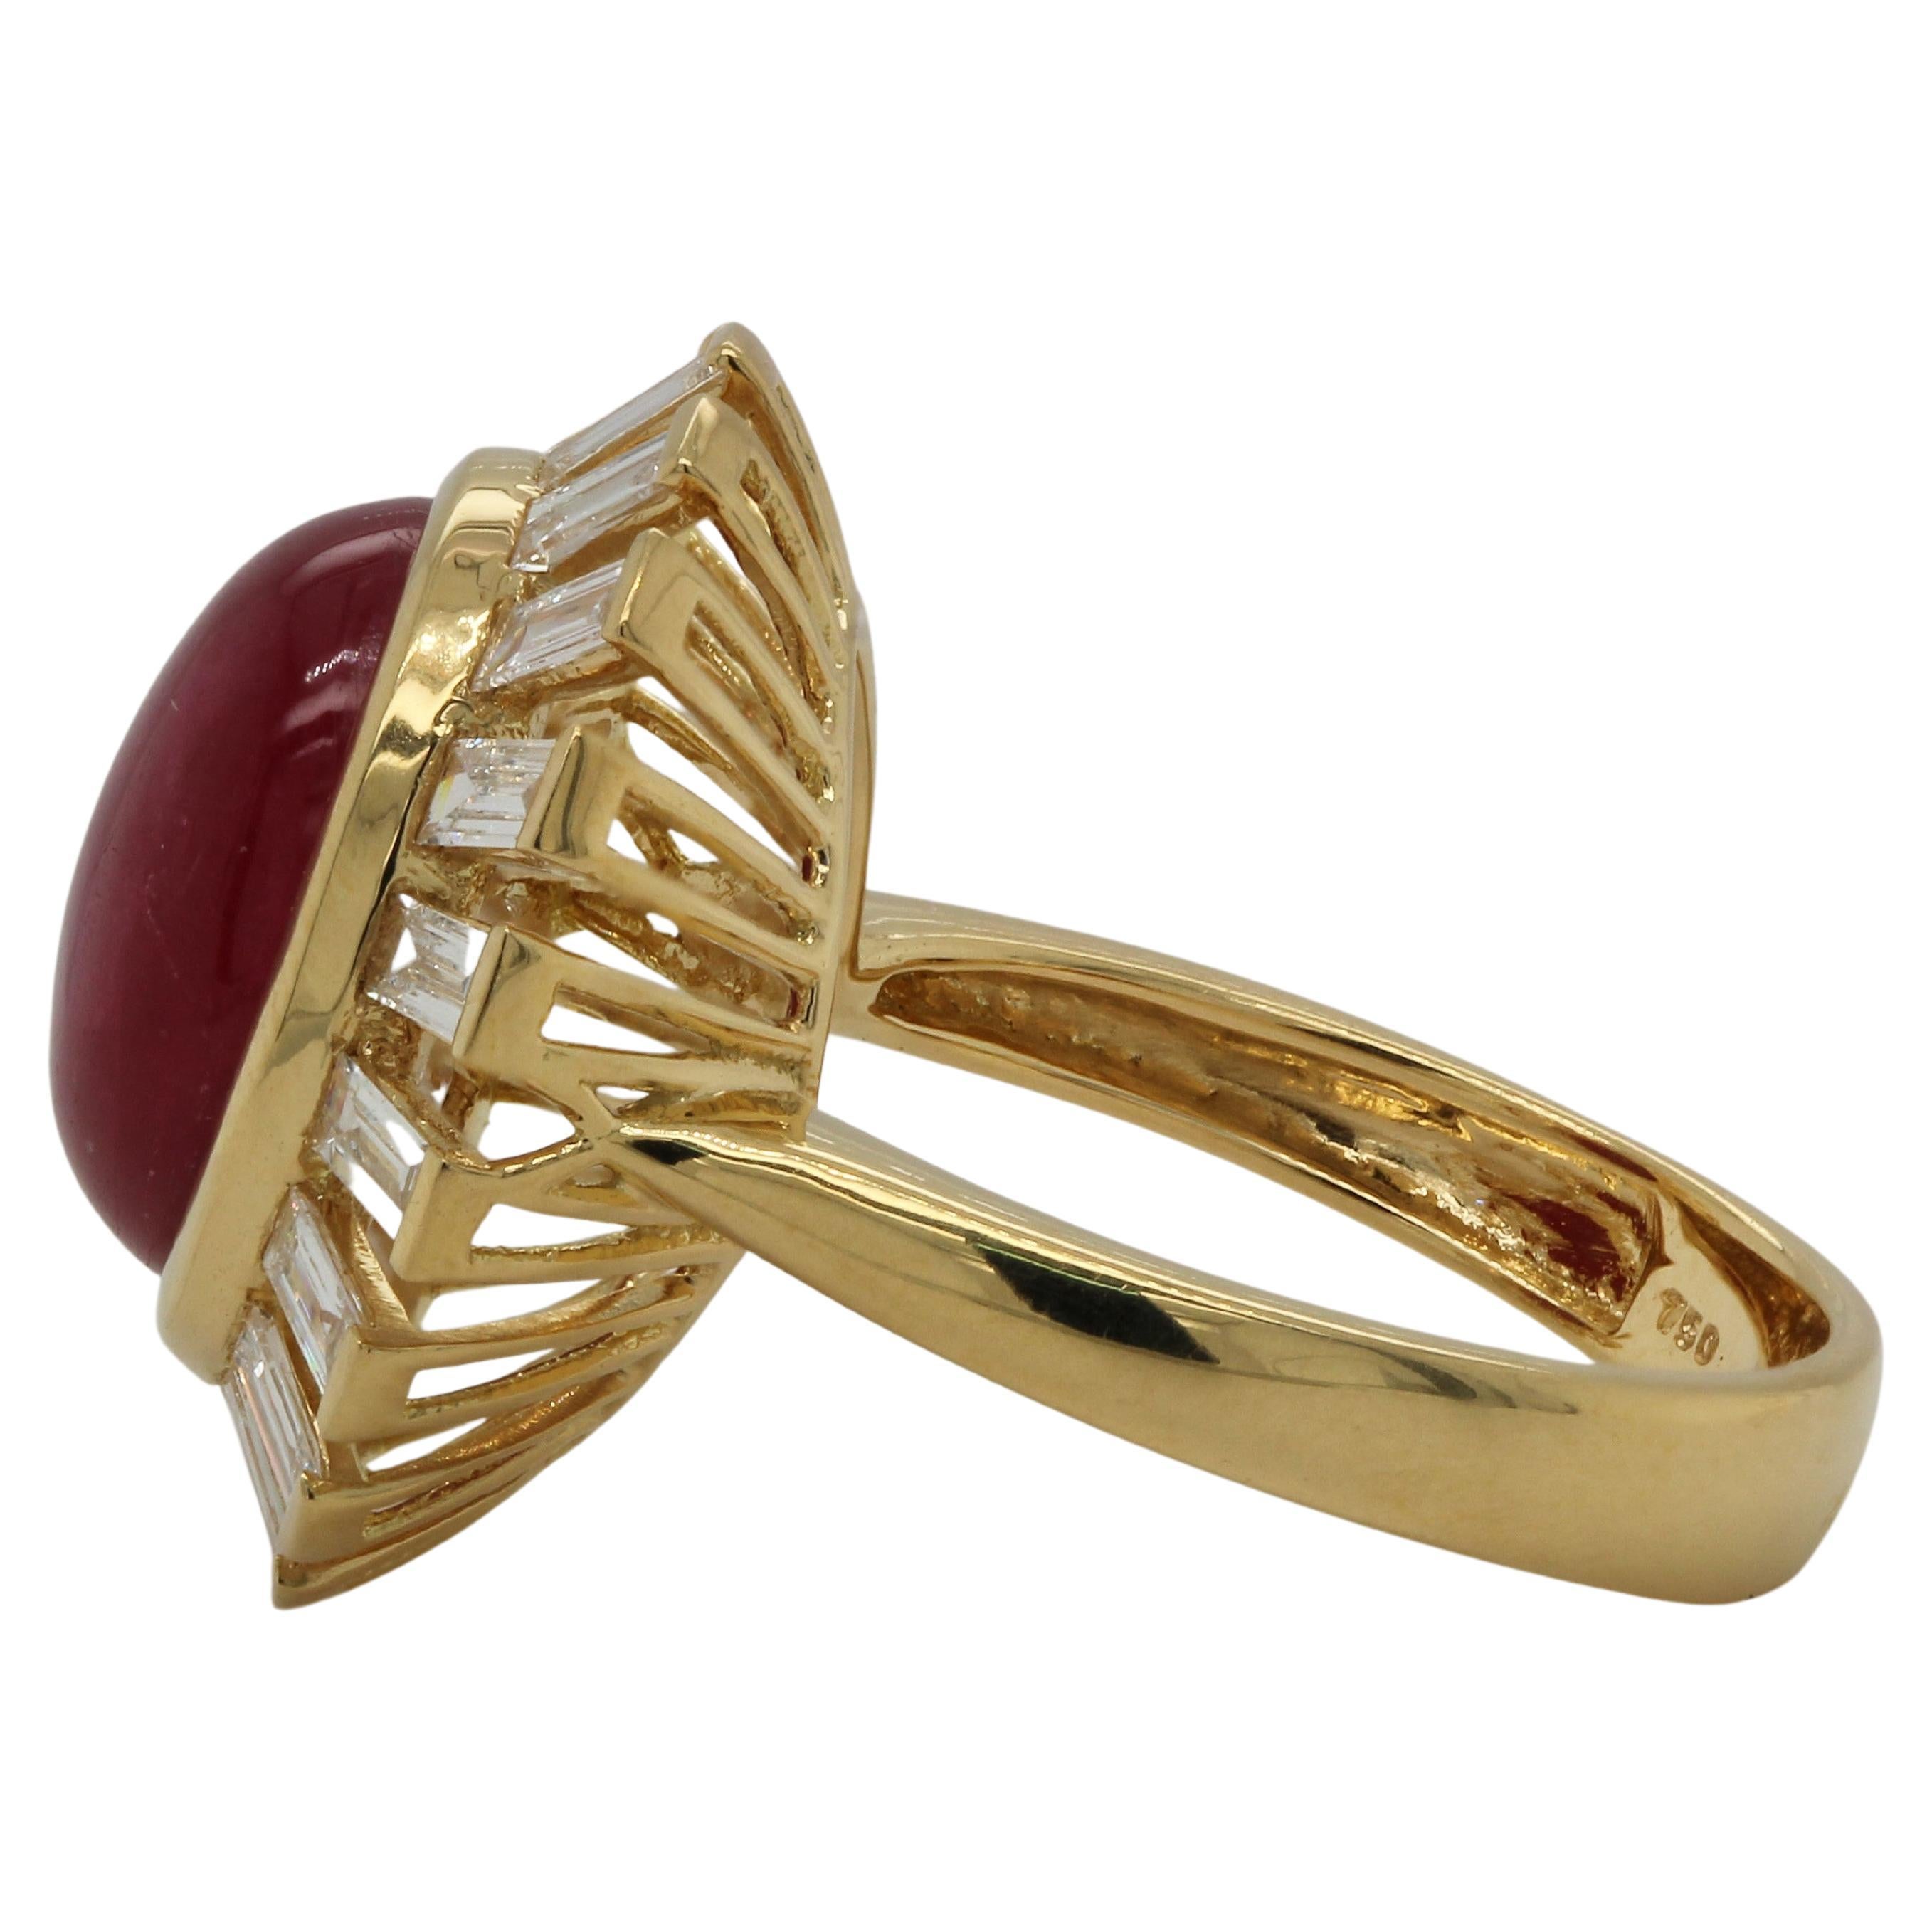 10.21 Carat Ruby and Diamond Ring in 18 Karat Gold For Sale 1